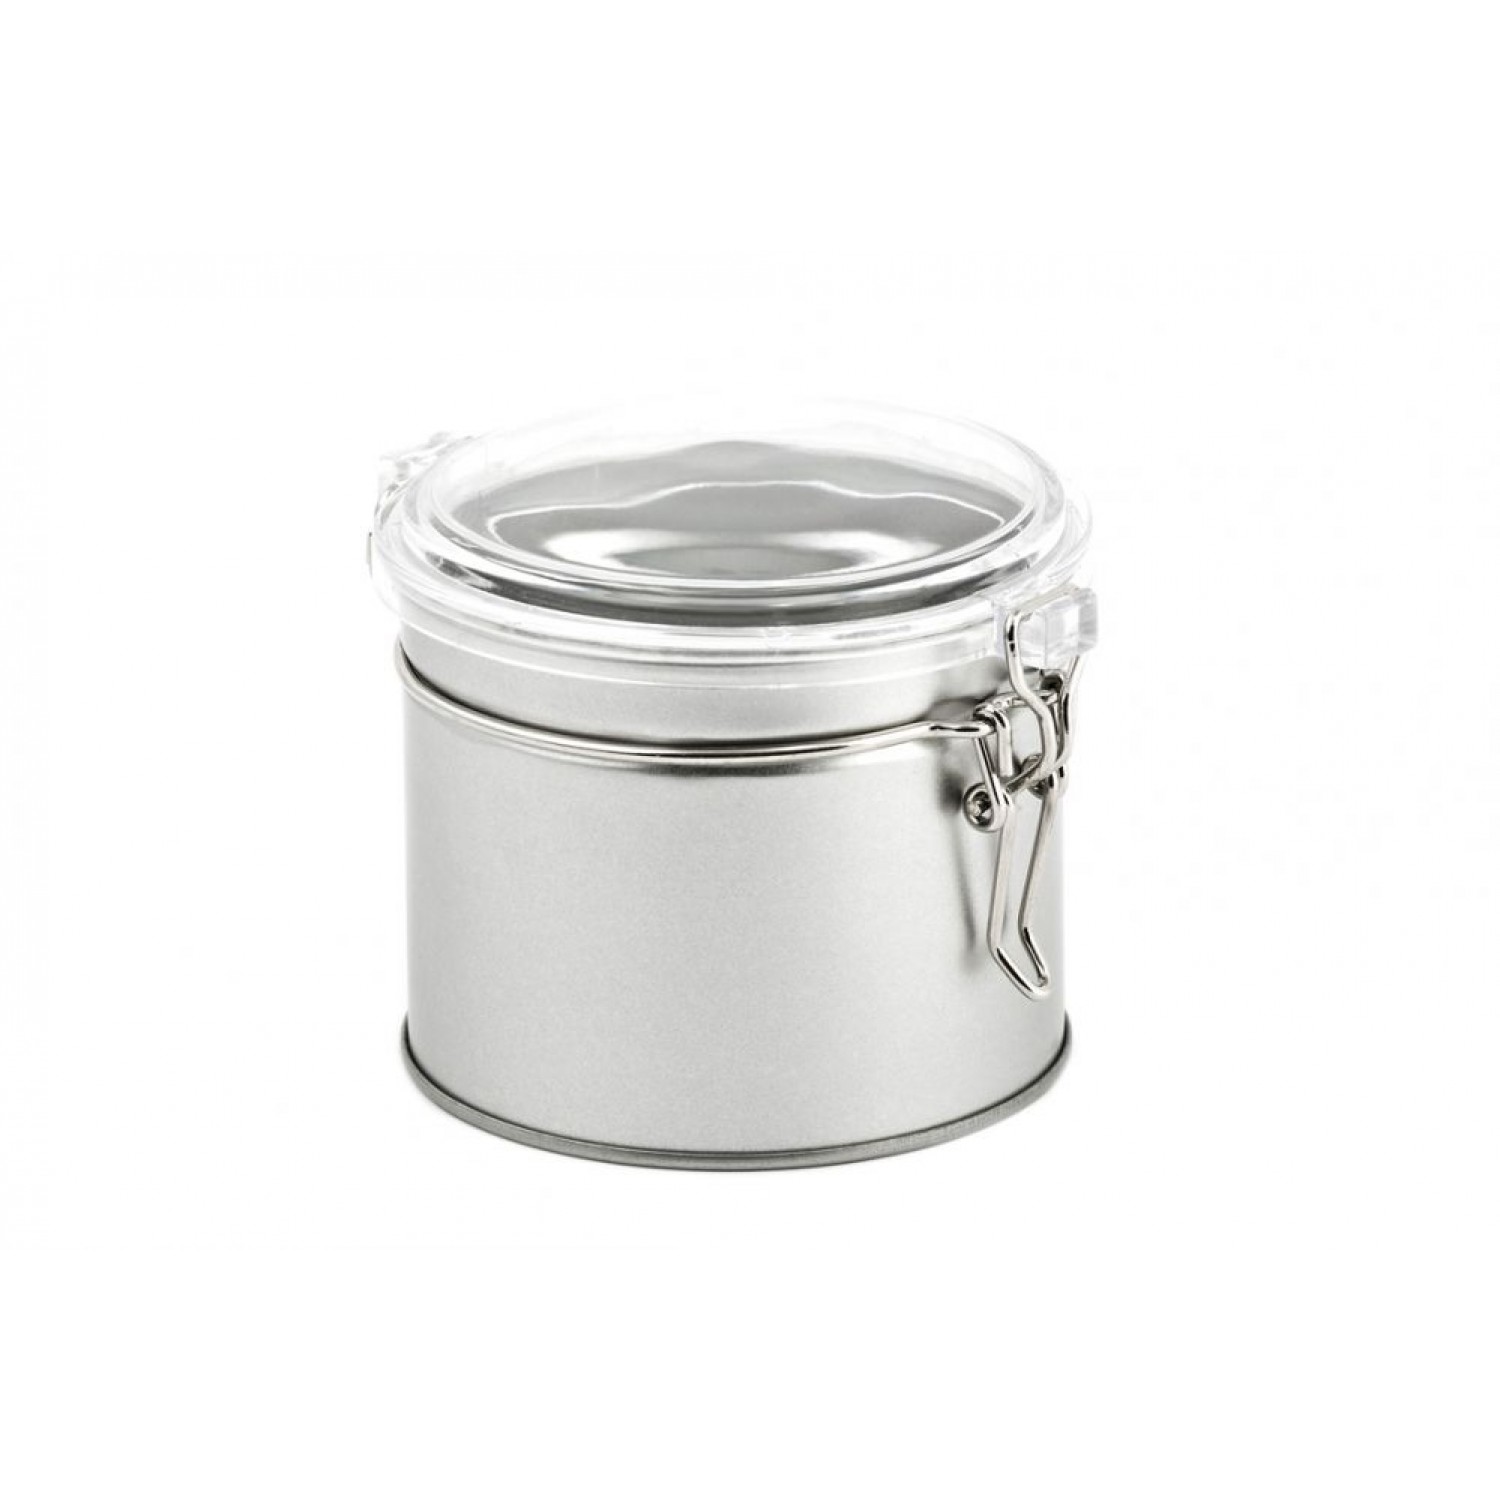 Cling Top Food Storage Tins with Viewing Window 540 ml/19 oz » Tindobo